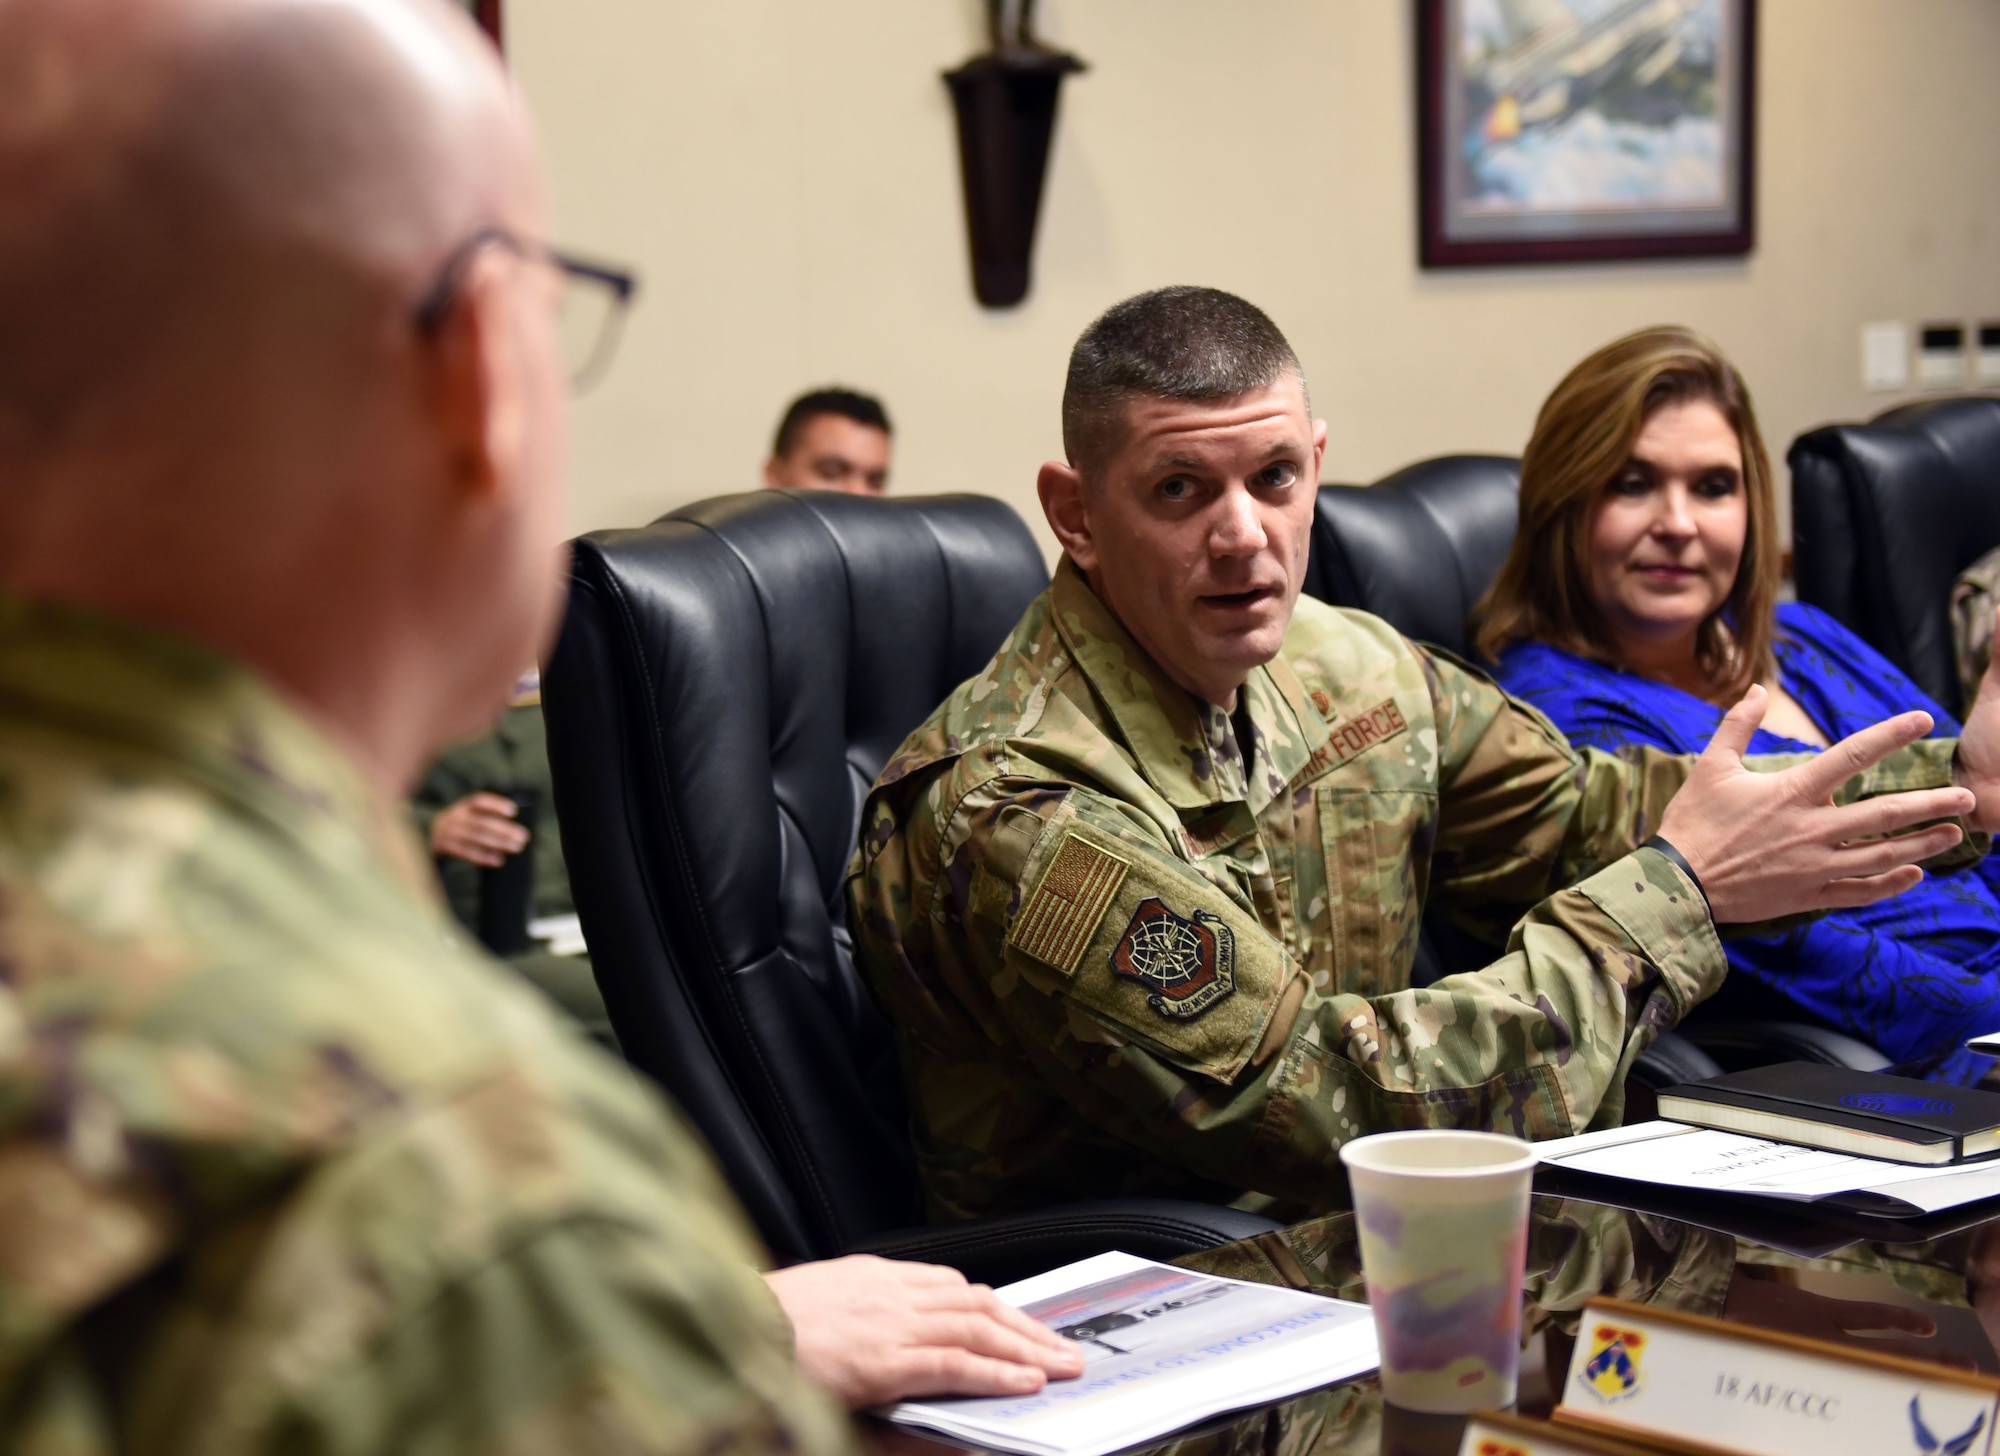 U.S. Air Force Chief Master Sgt. Derek Crowder, 60th Air Mobility Wing command chief, briefs U.S. Air Force Maj. Gen. Sam Barrett, 18th Air Force commander, during a visit to Travis Air Force Base, California, March 5, 2019. Barrett, along with his wife, Kelly and U.S. Air Force Chief Master Sgt. Chris Simpson, 18th Air Force command chief, toured the base March 4 to 8 as part of a scheduled visit. (U.S. Air Force photo by Airman 1st Class Christian Conrad)